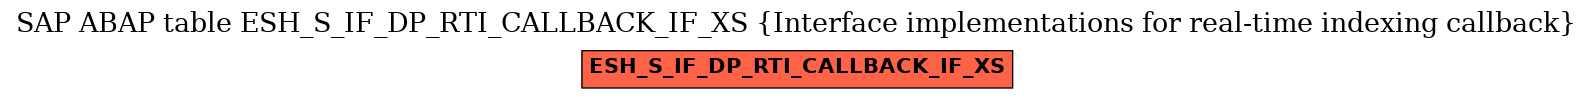 E-R Diagram for table ESH_S_IF_DP_RTI_CALLBACK_IF_XS (Interface implementations for real-time indexing callback)